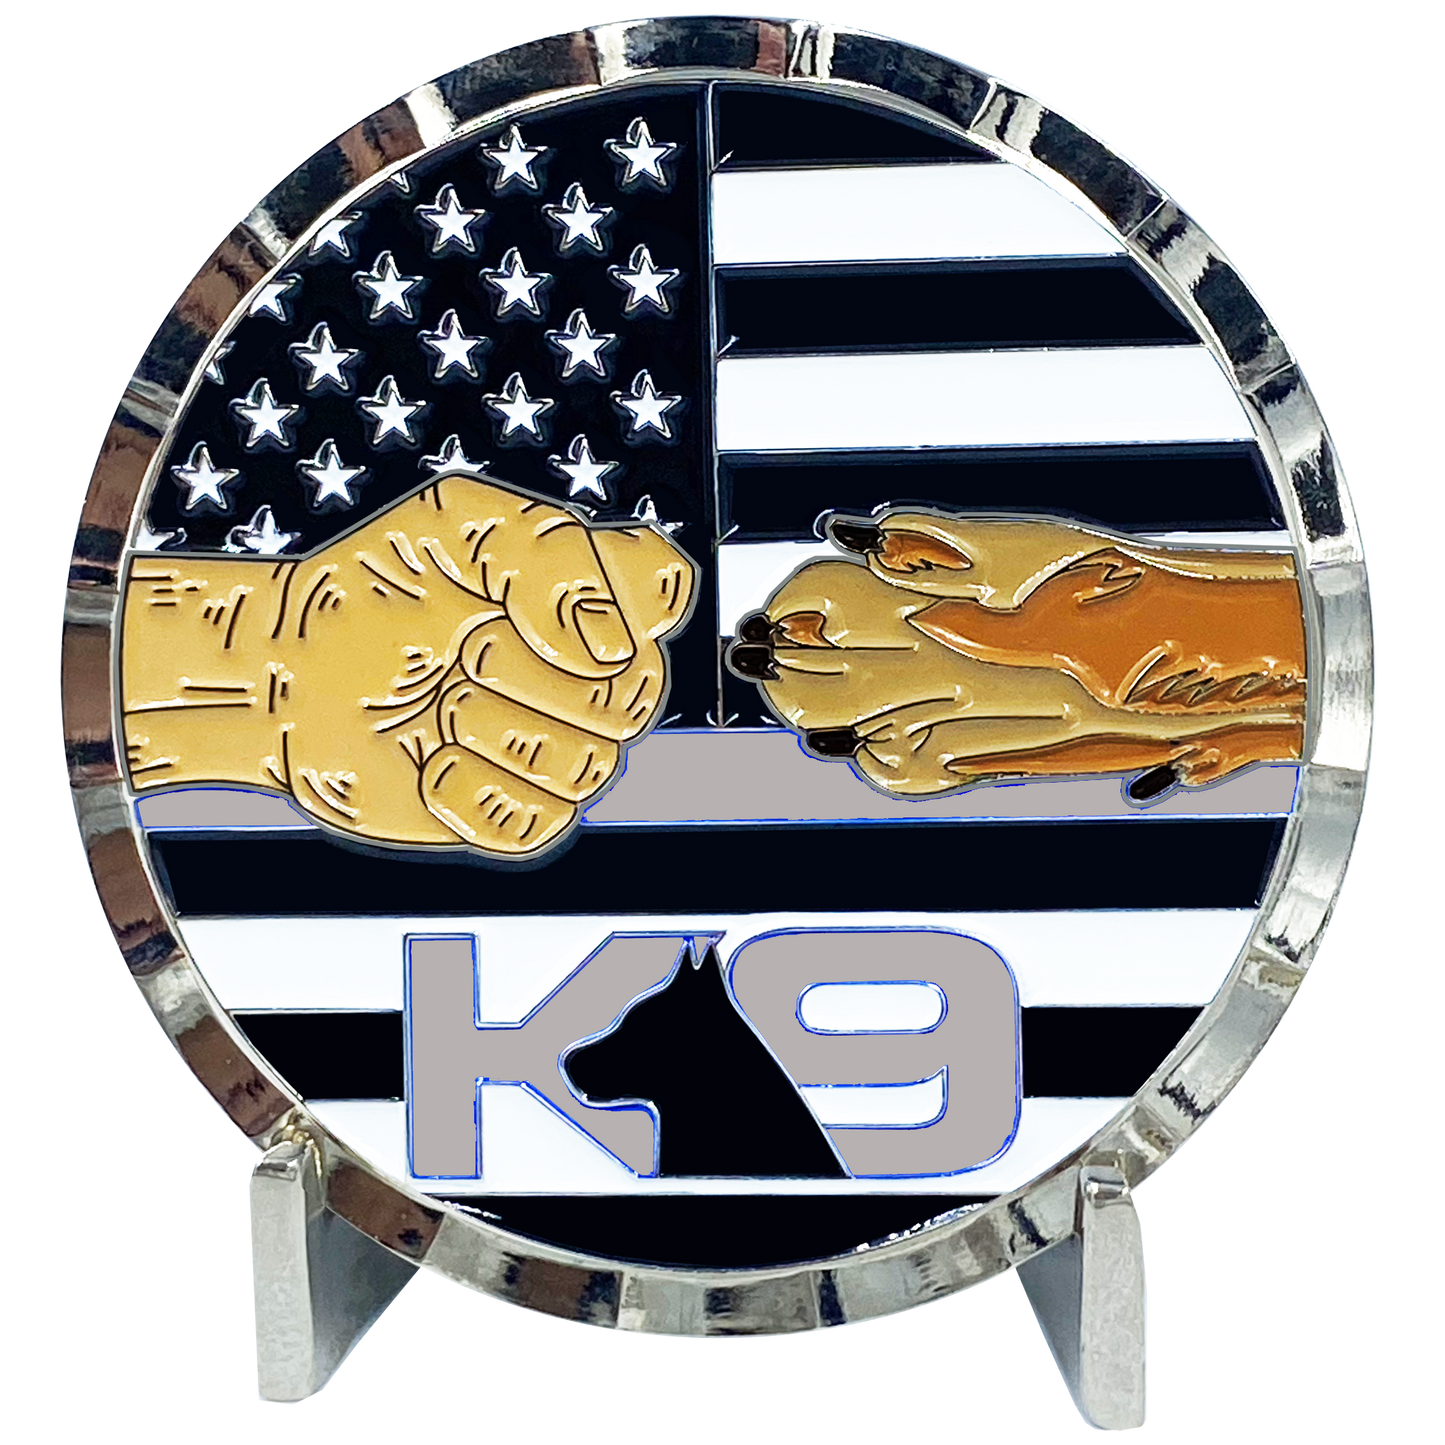 BB-014 K9 Thin Gray Line Challenge Coin Fist Paw Bump Corrections Correctional Officer CO Police